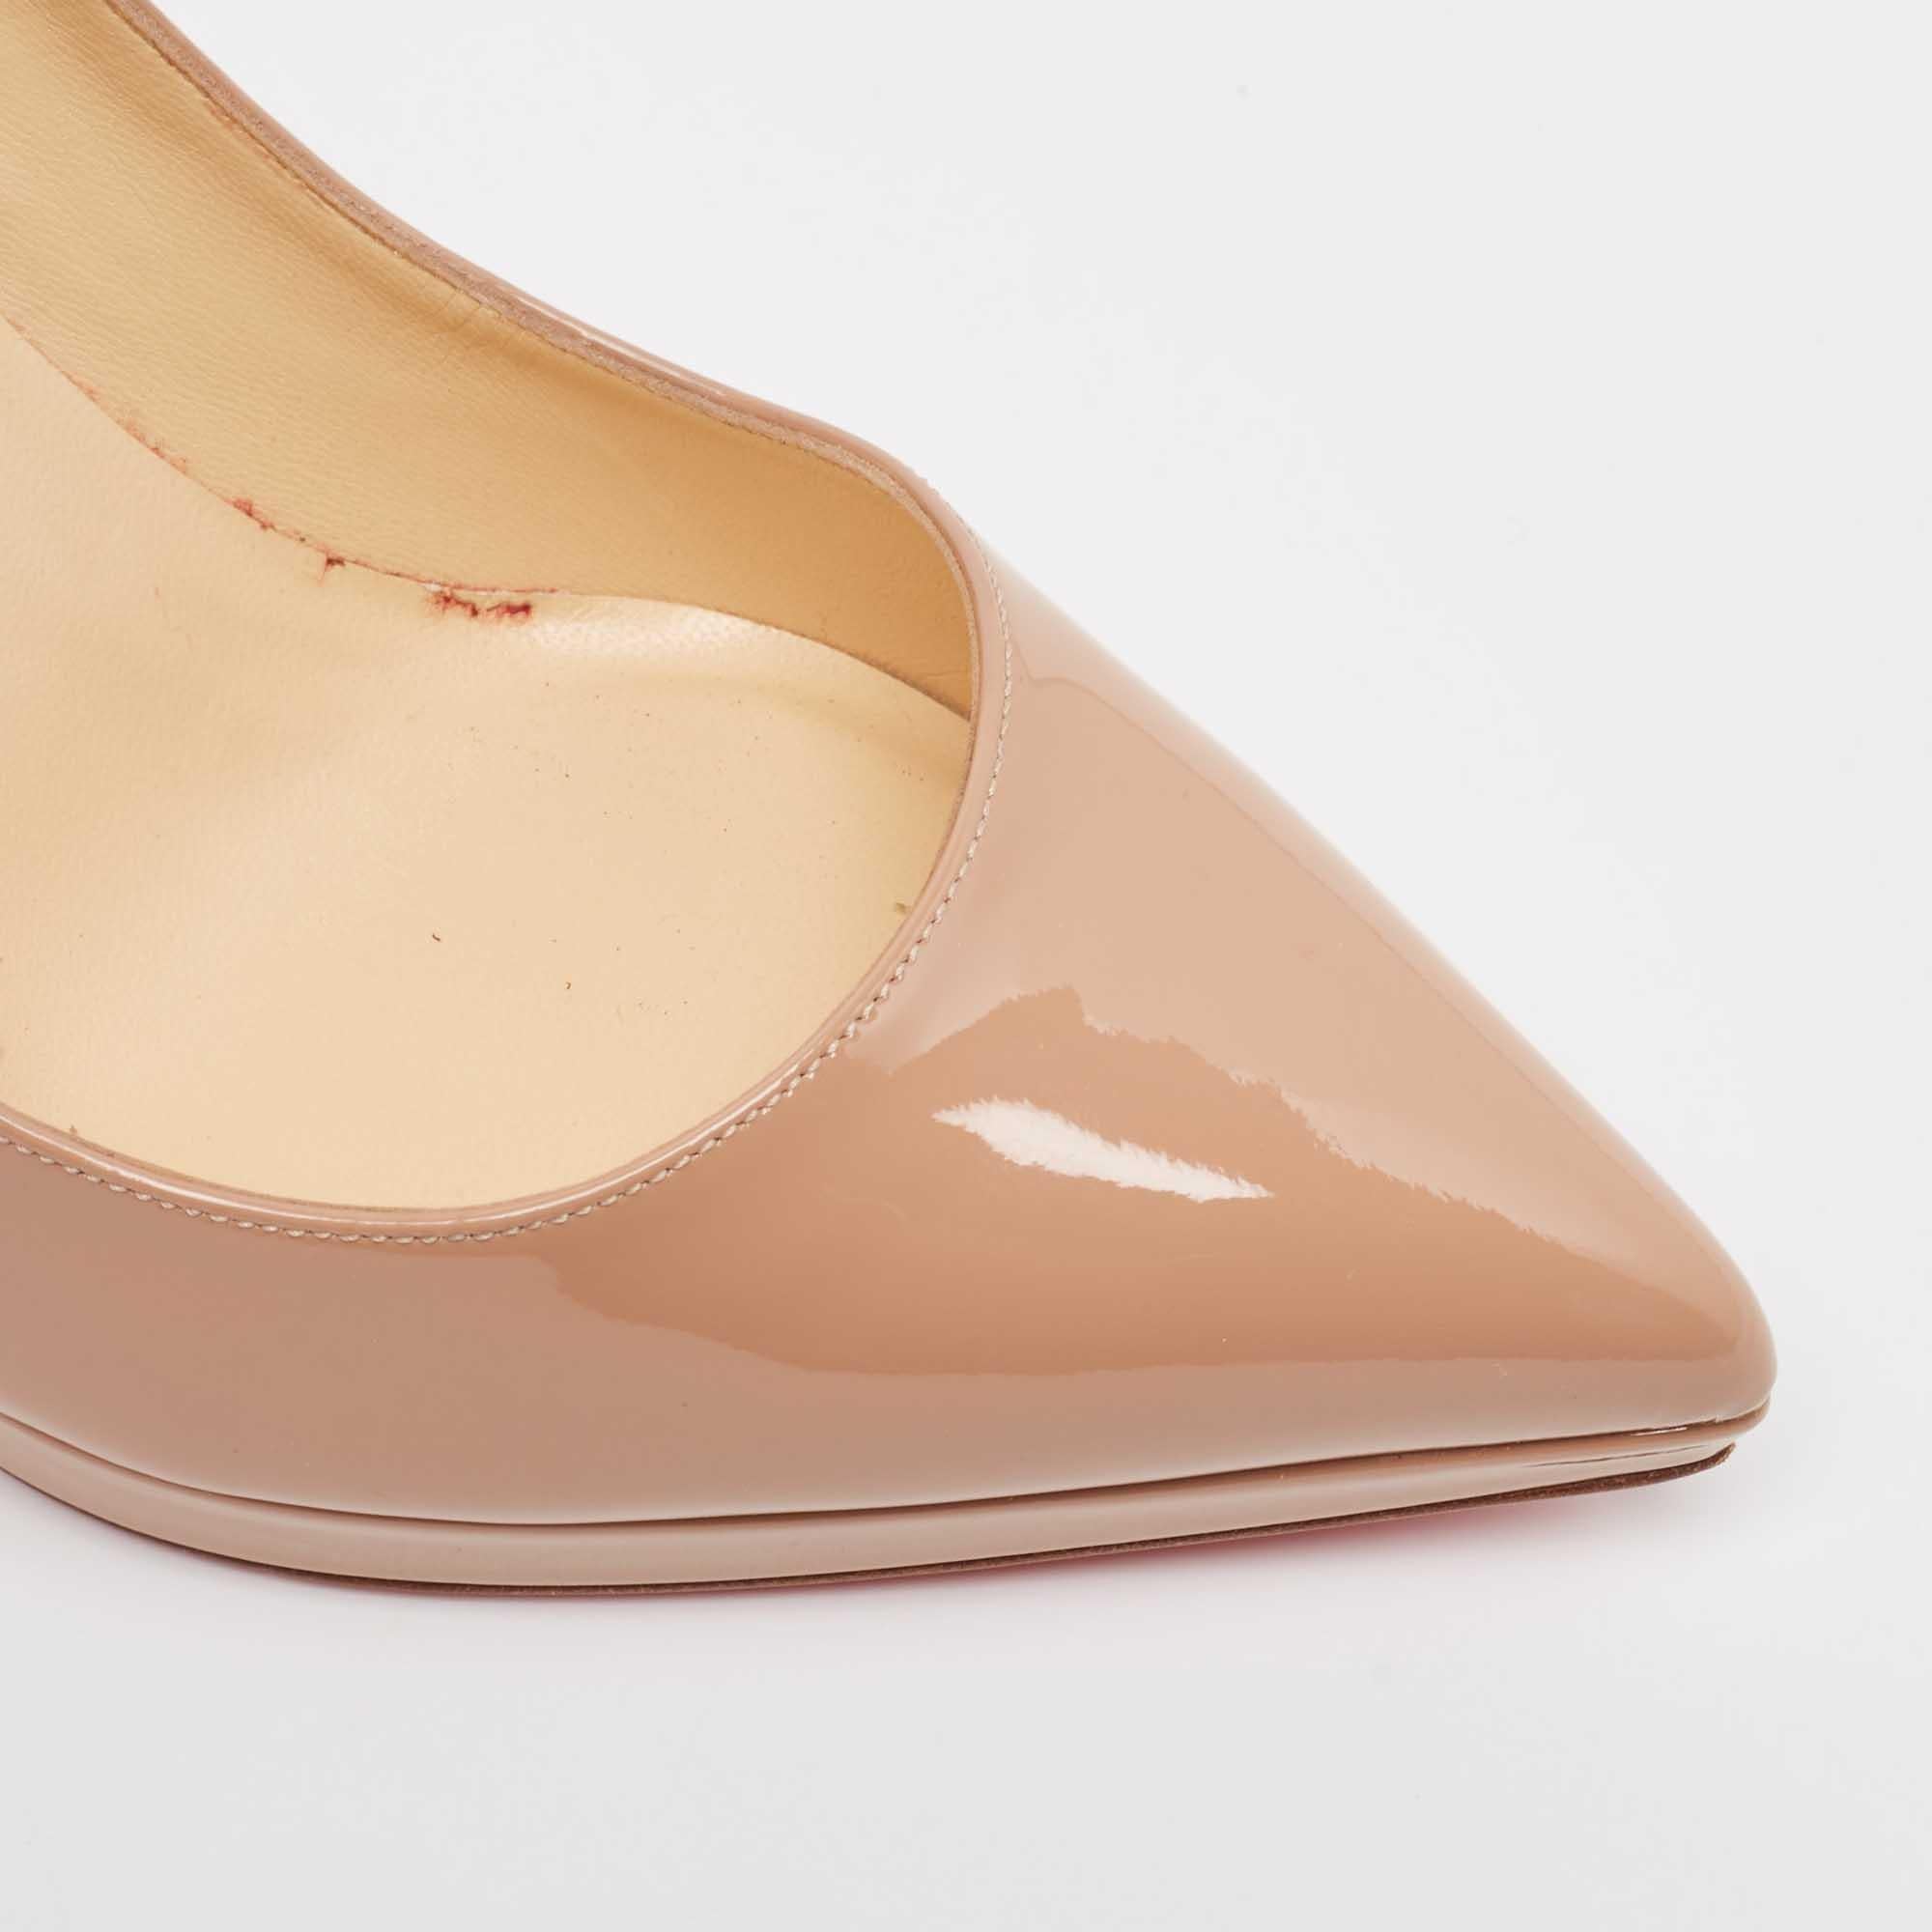 Christian Louboutin Beige Patent Leather Pigalle Plato Pumps Size 37 For Sale 3